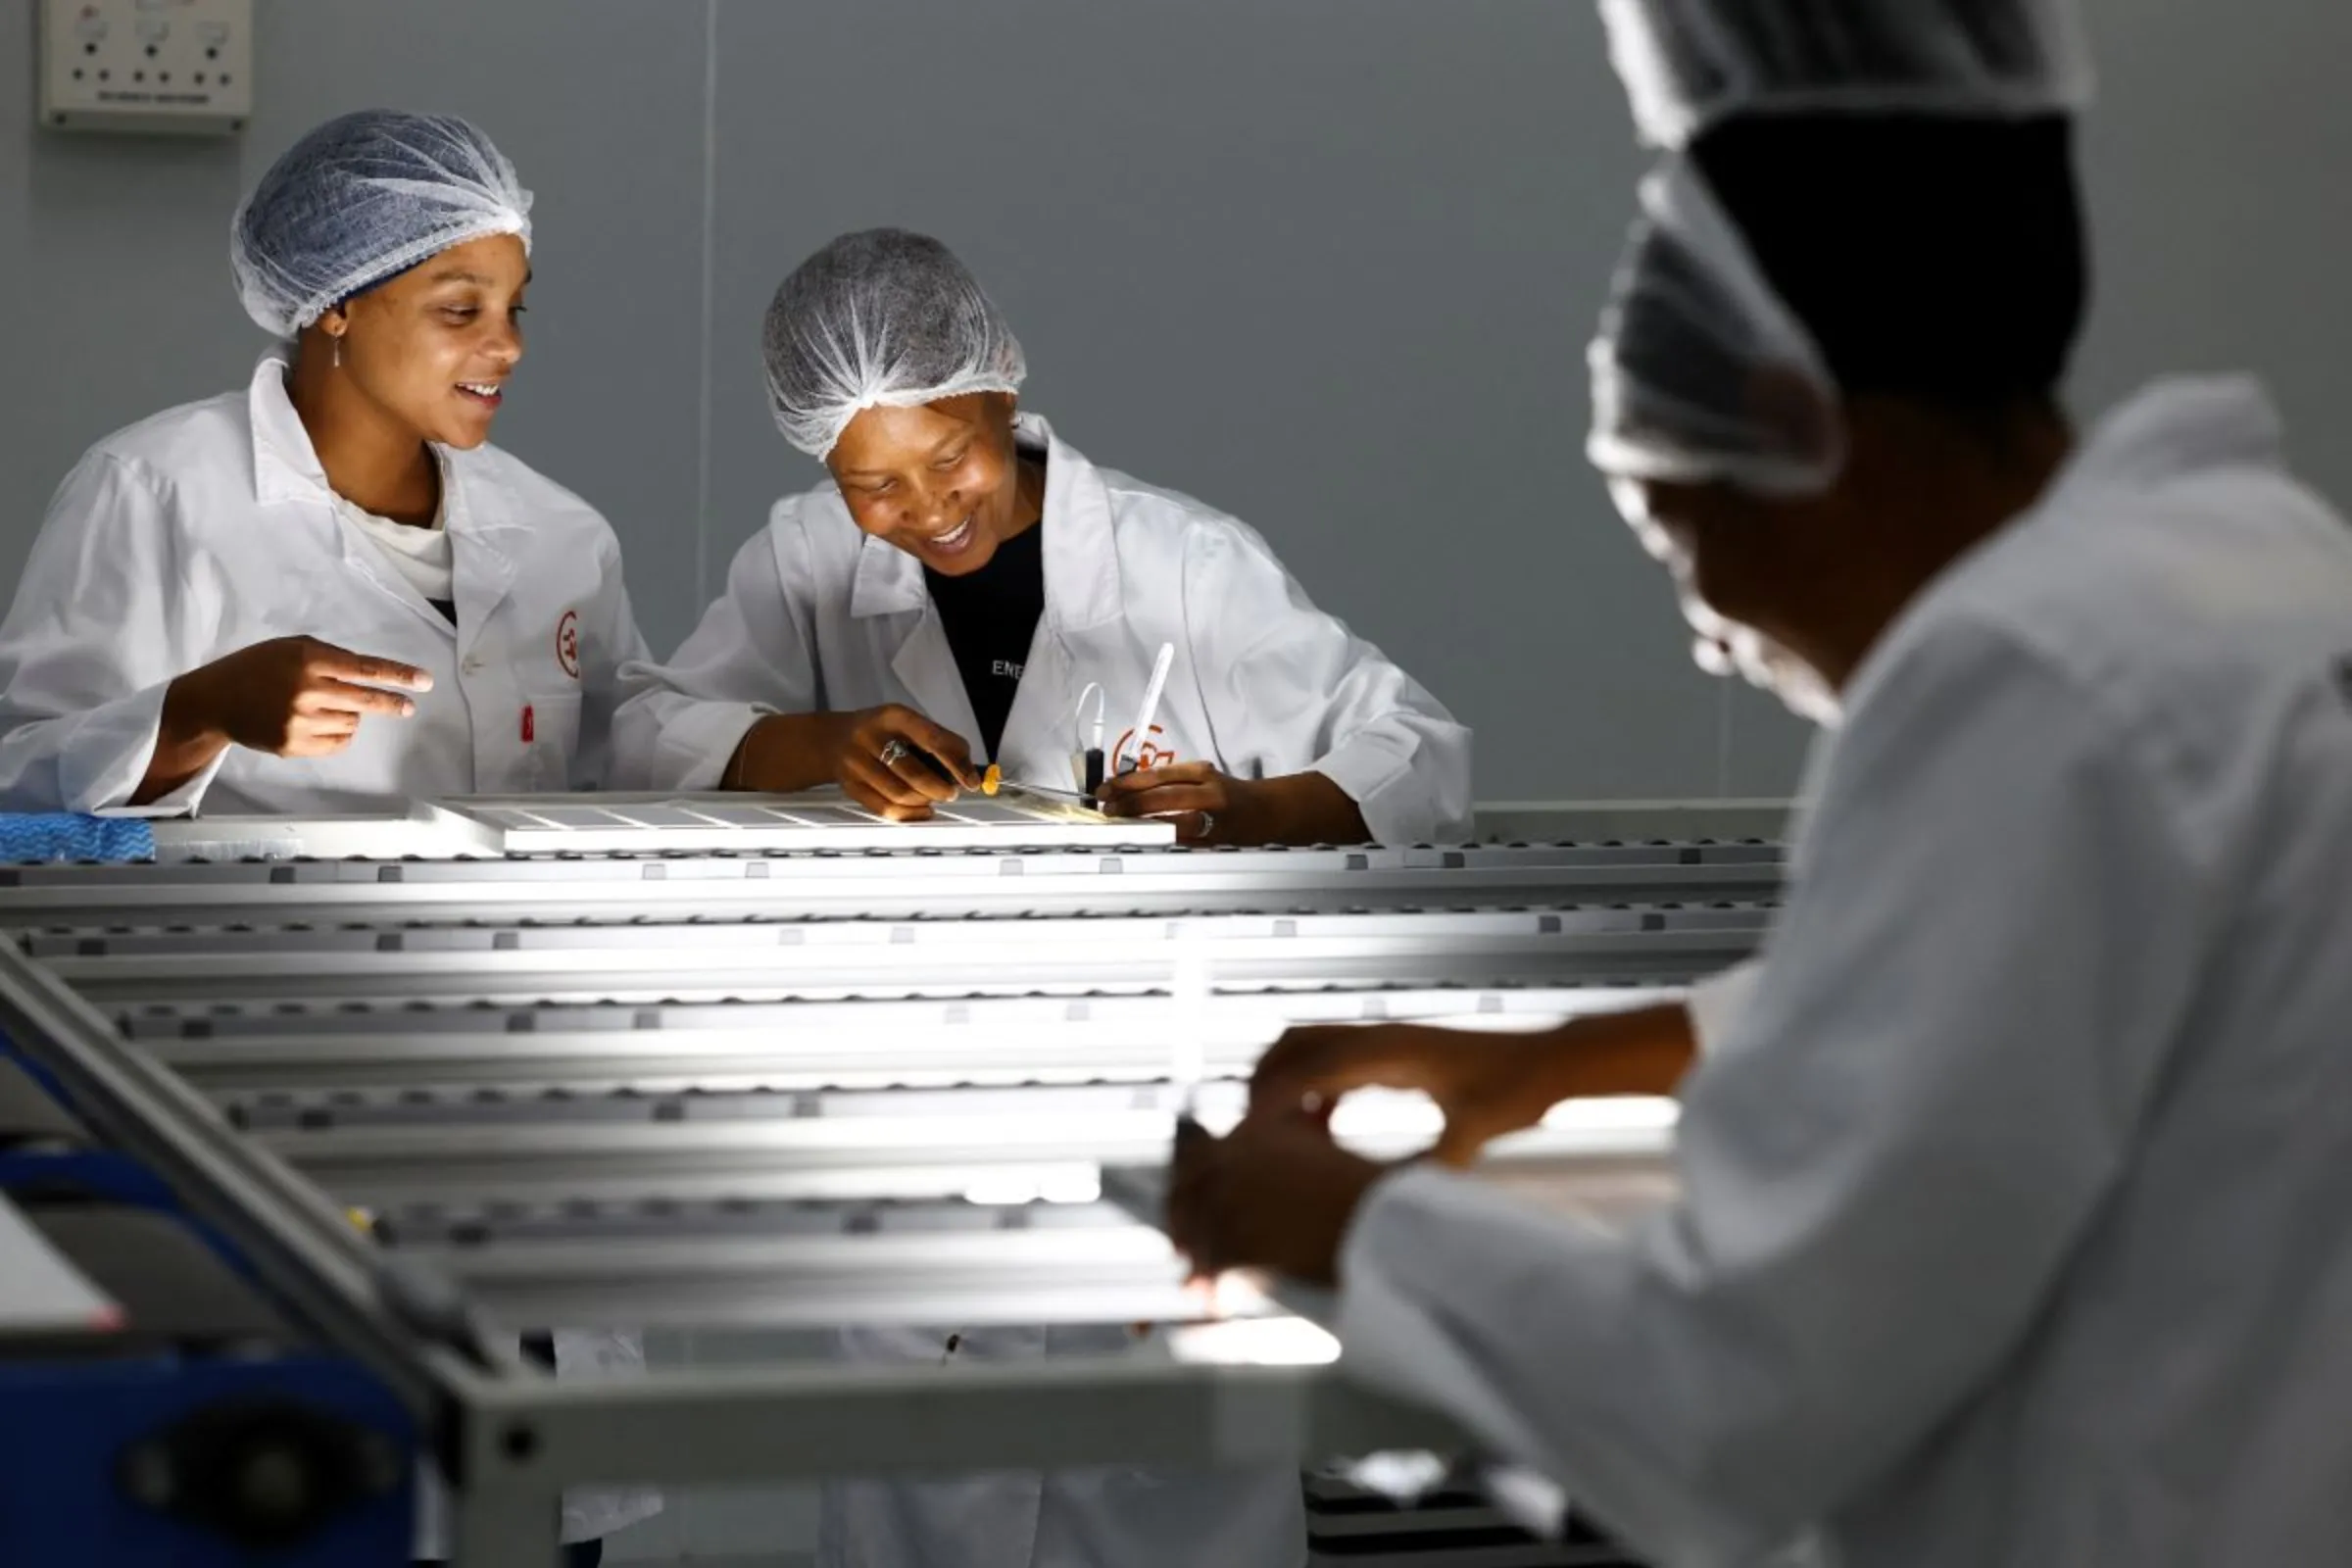 Women interact, as they test LED lights on solar panels, at a factory called Ener-G-Africa, where they produce high-quality solar panels made by an all-women team, in Cape Town, South Africa, February 9, 2023